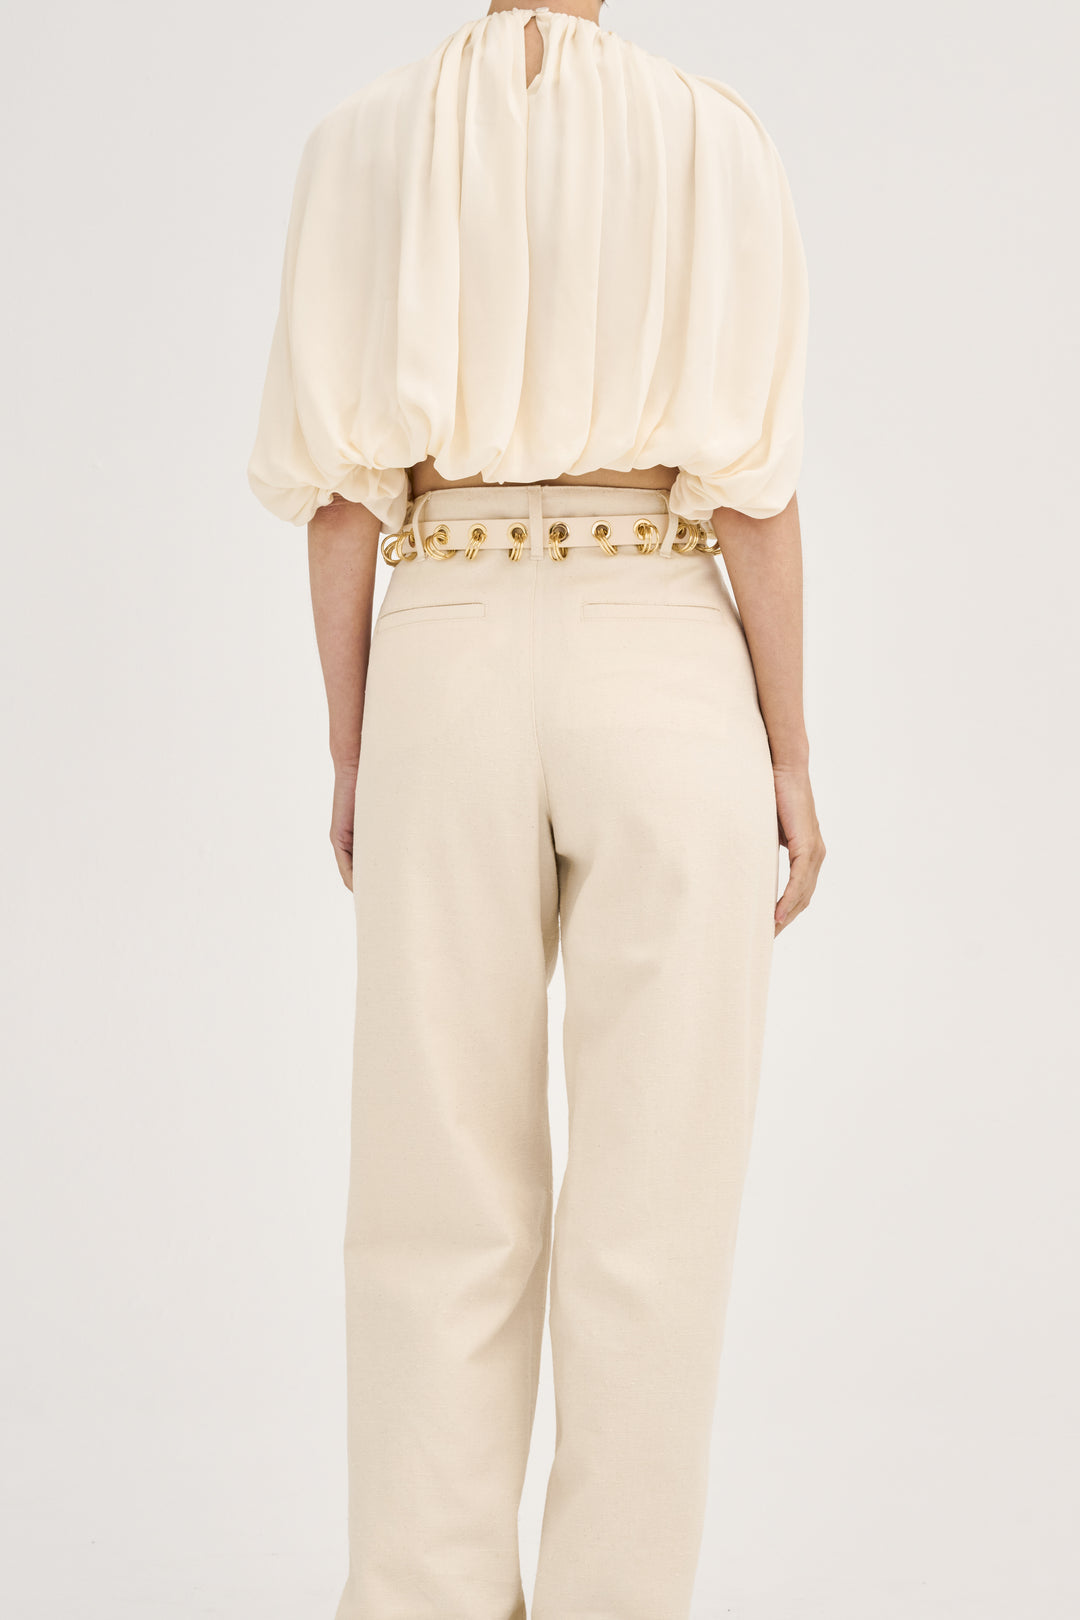 Model wearing Déhanche Revenge Gold white leather belt with gold grommets and buckle, styled with high-waisted cream pants and a flowy cream blouse, back view.